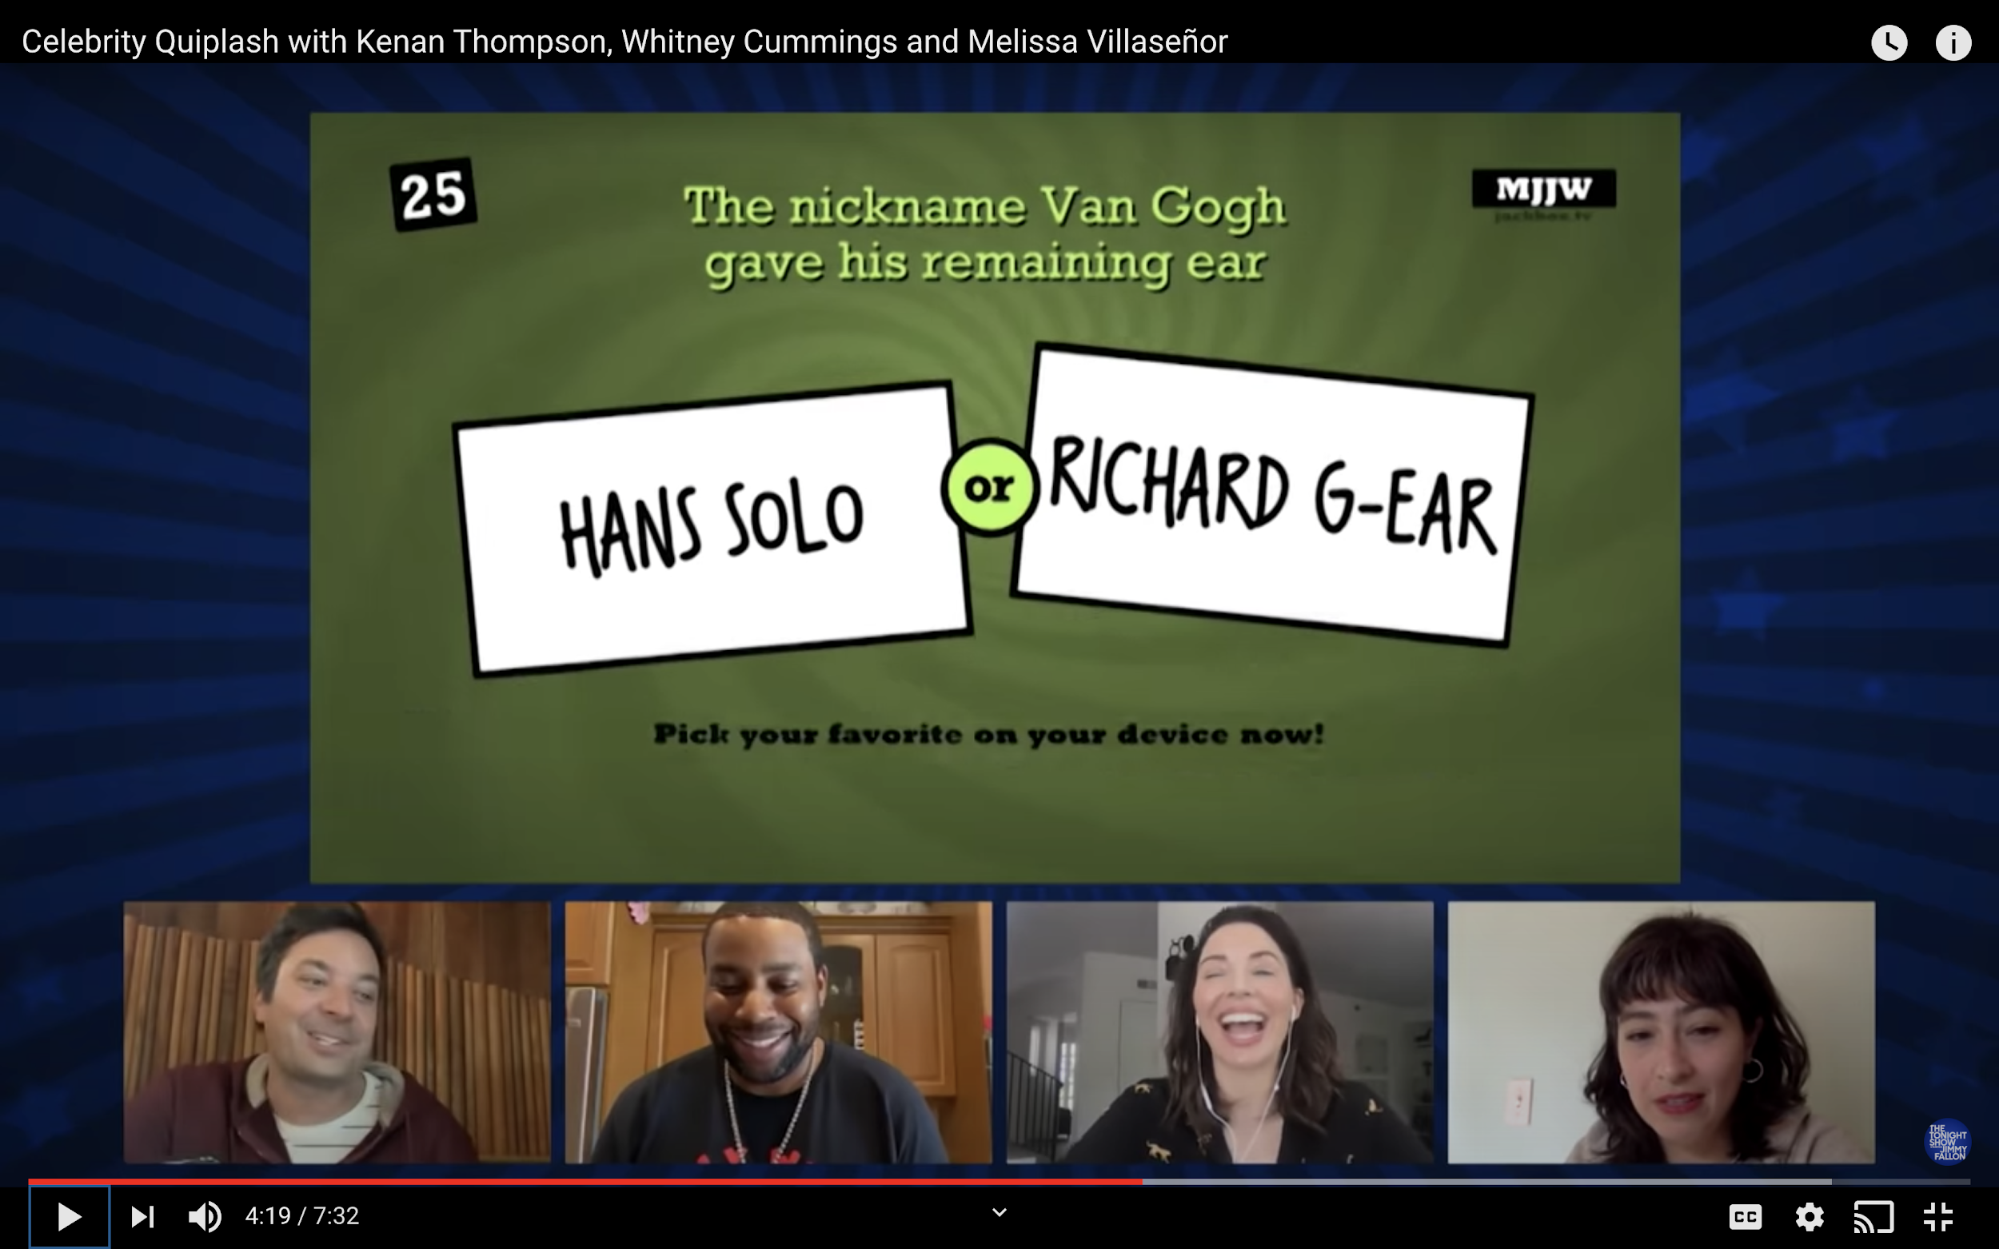 Jackbox games let players focus on the fun with no strong competition - a lovely way to bond with your team. 